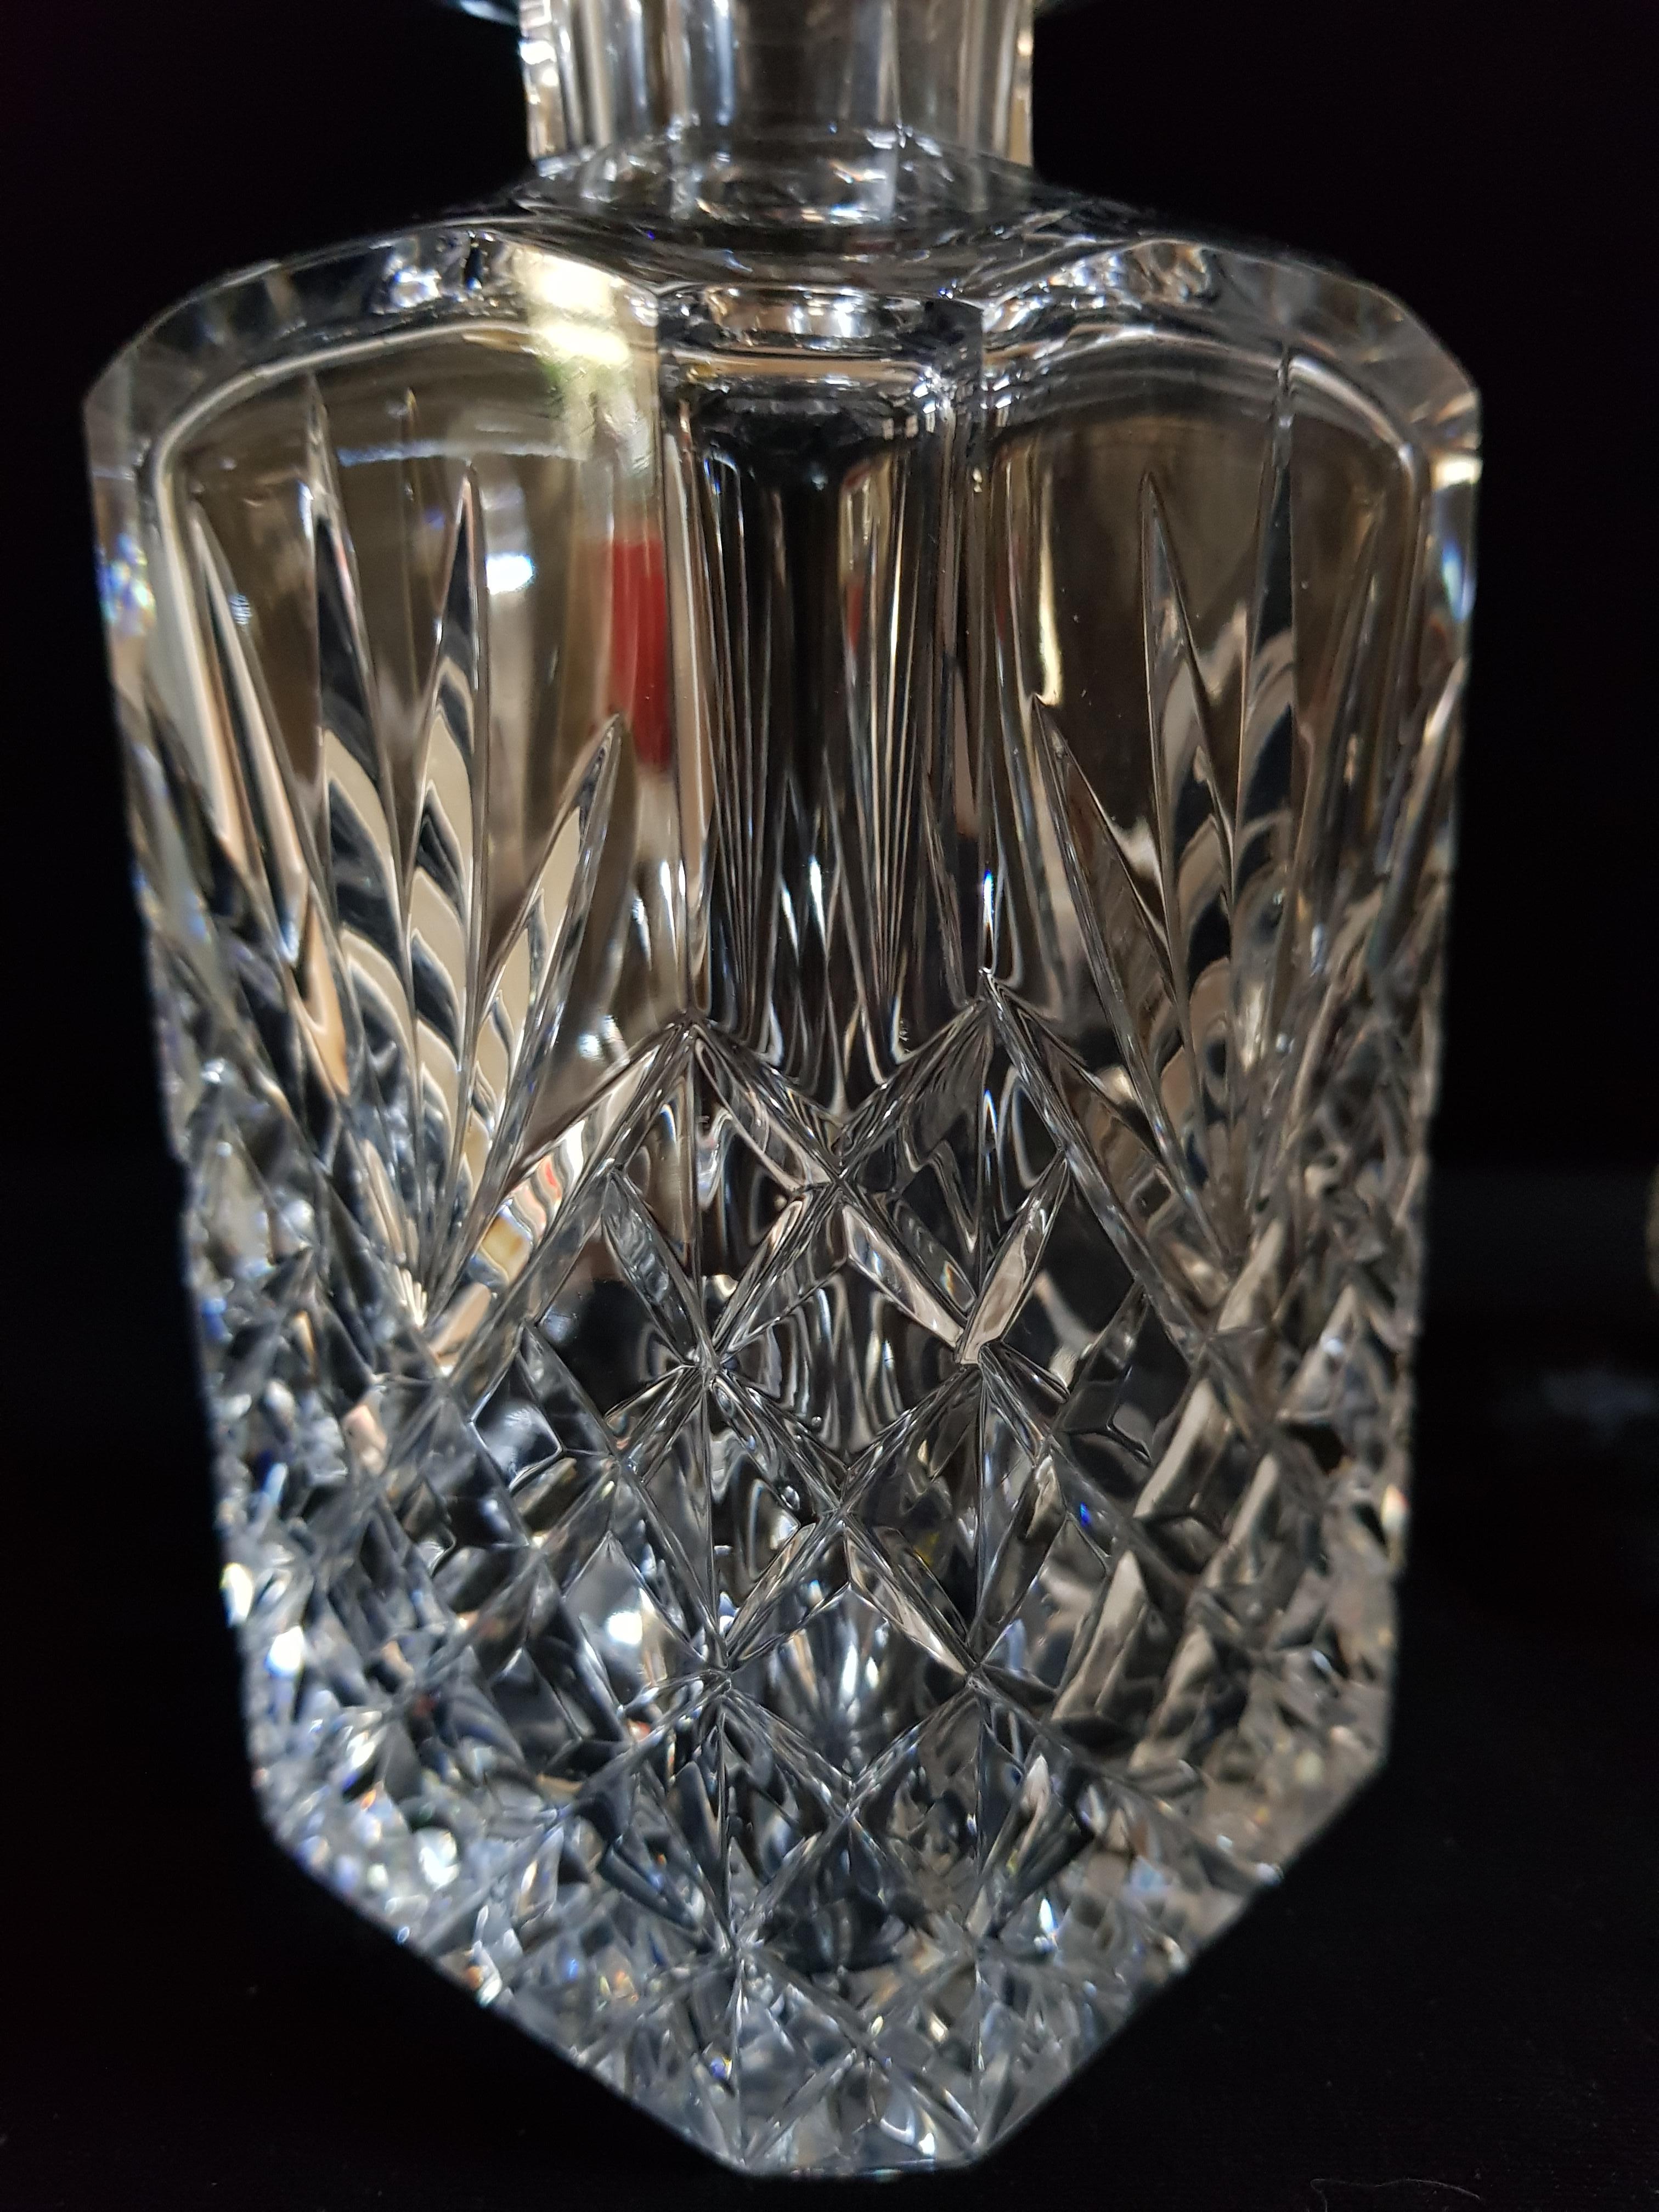 Vitange Bohemian Brilliant Cut Crystal Drinking Set In Excellent Condition For Sale In Grantham, GB